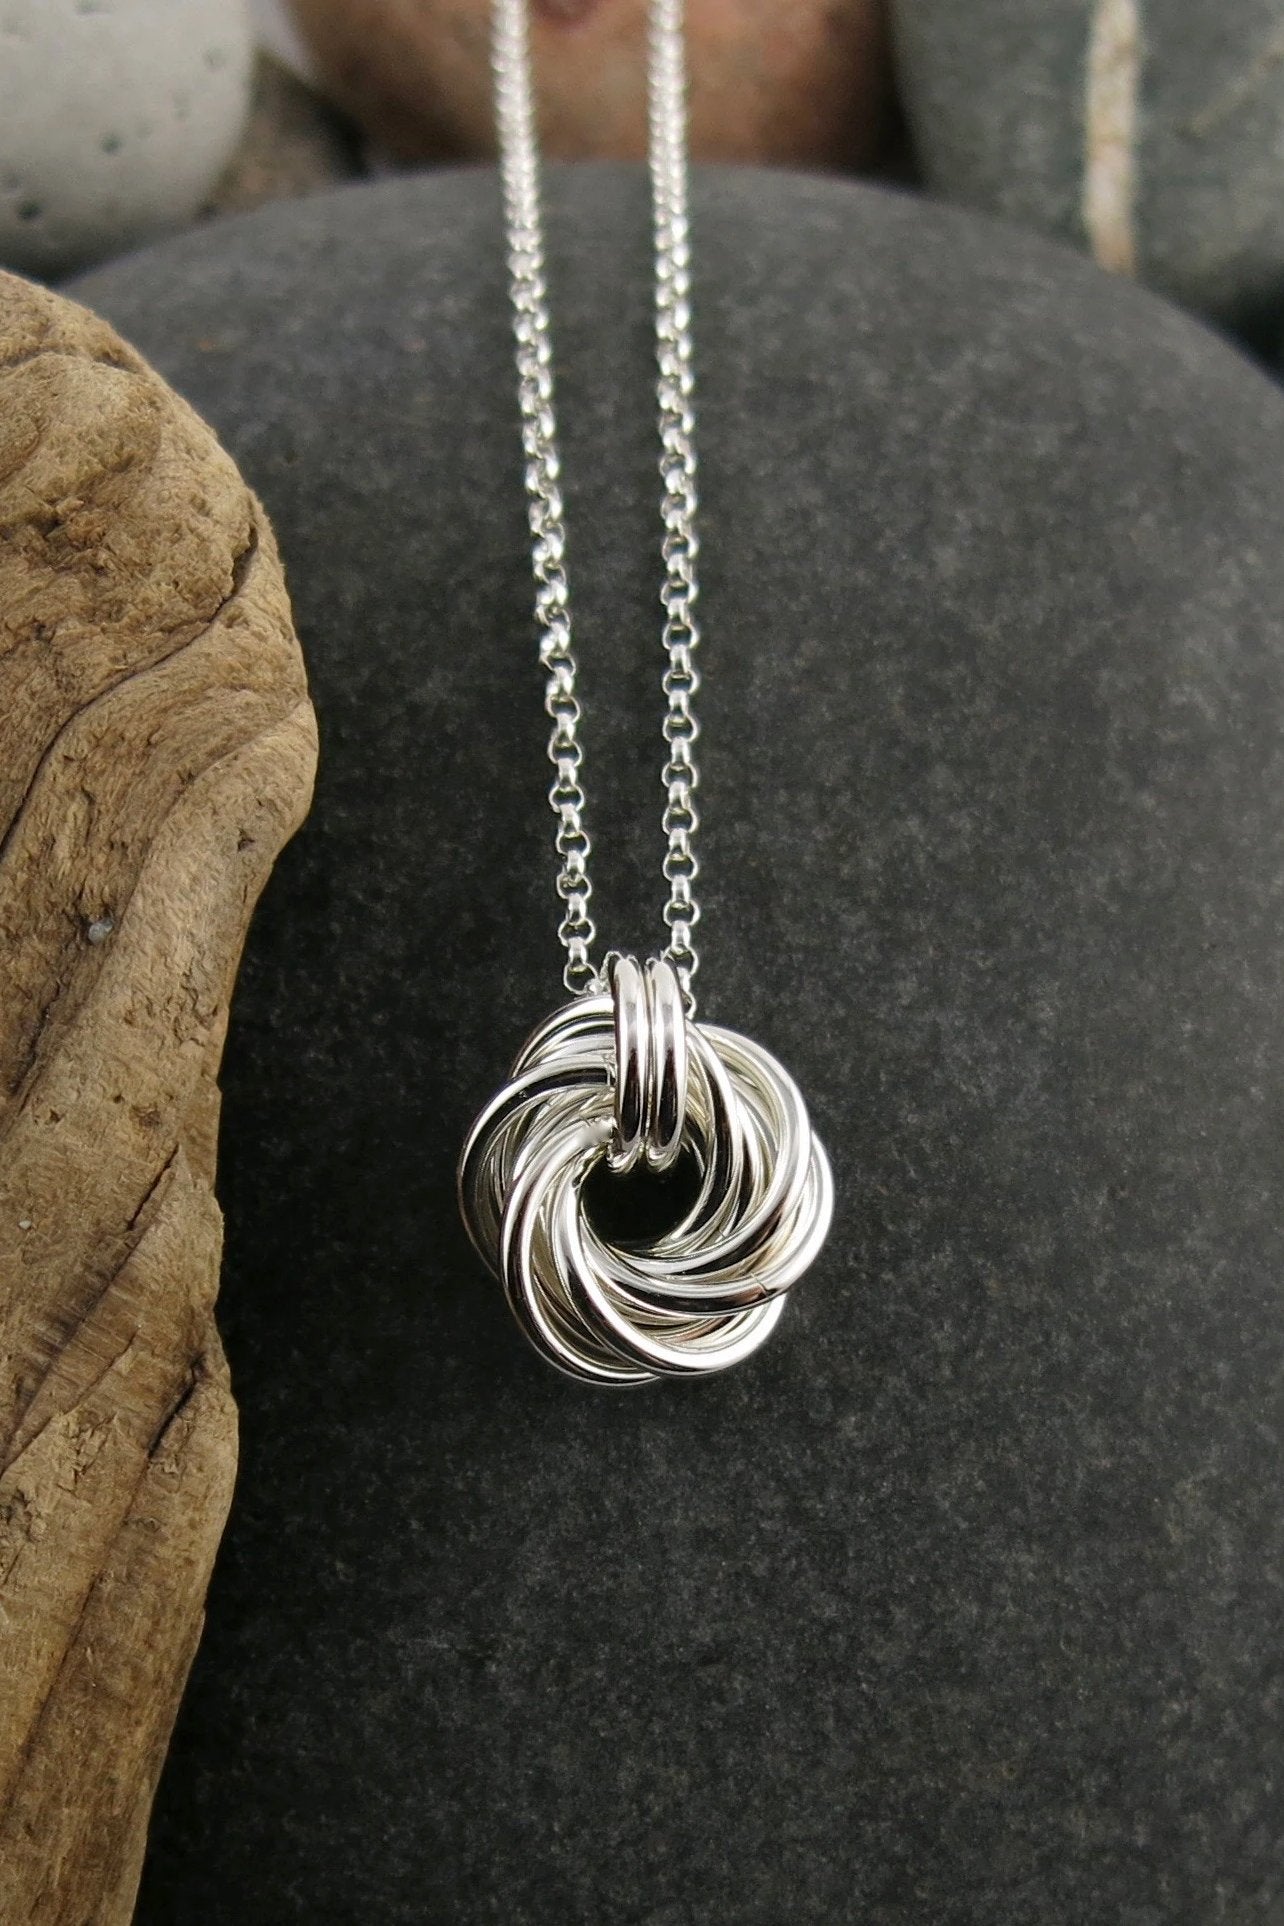 Endless Love Knot Necklace • Sterling Silver with Rolo Chain 2021